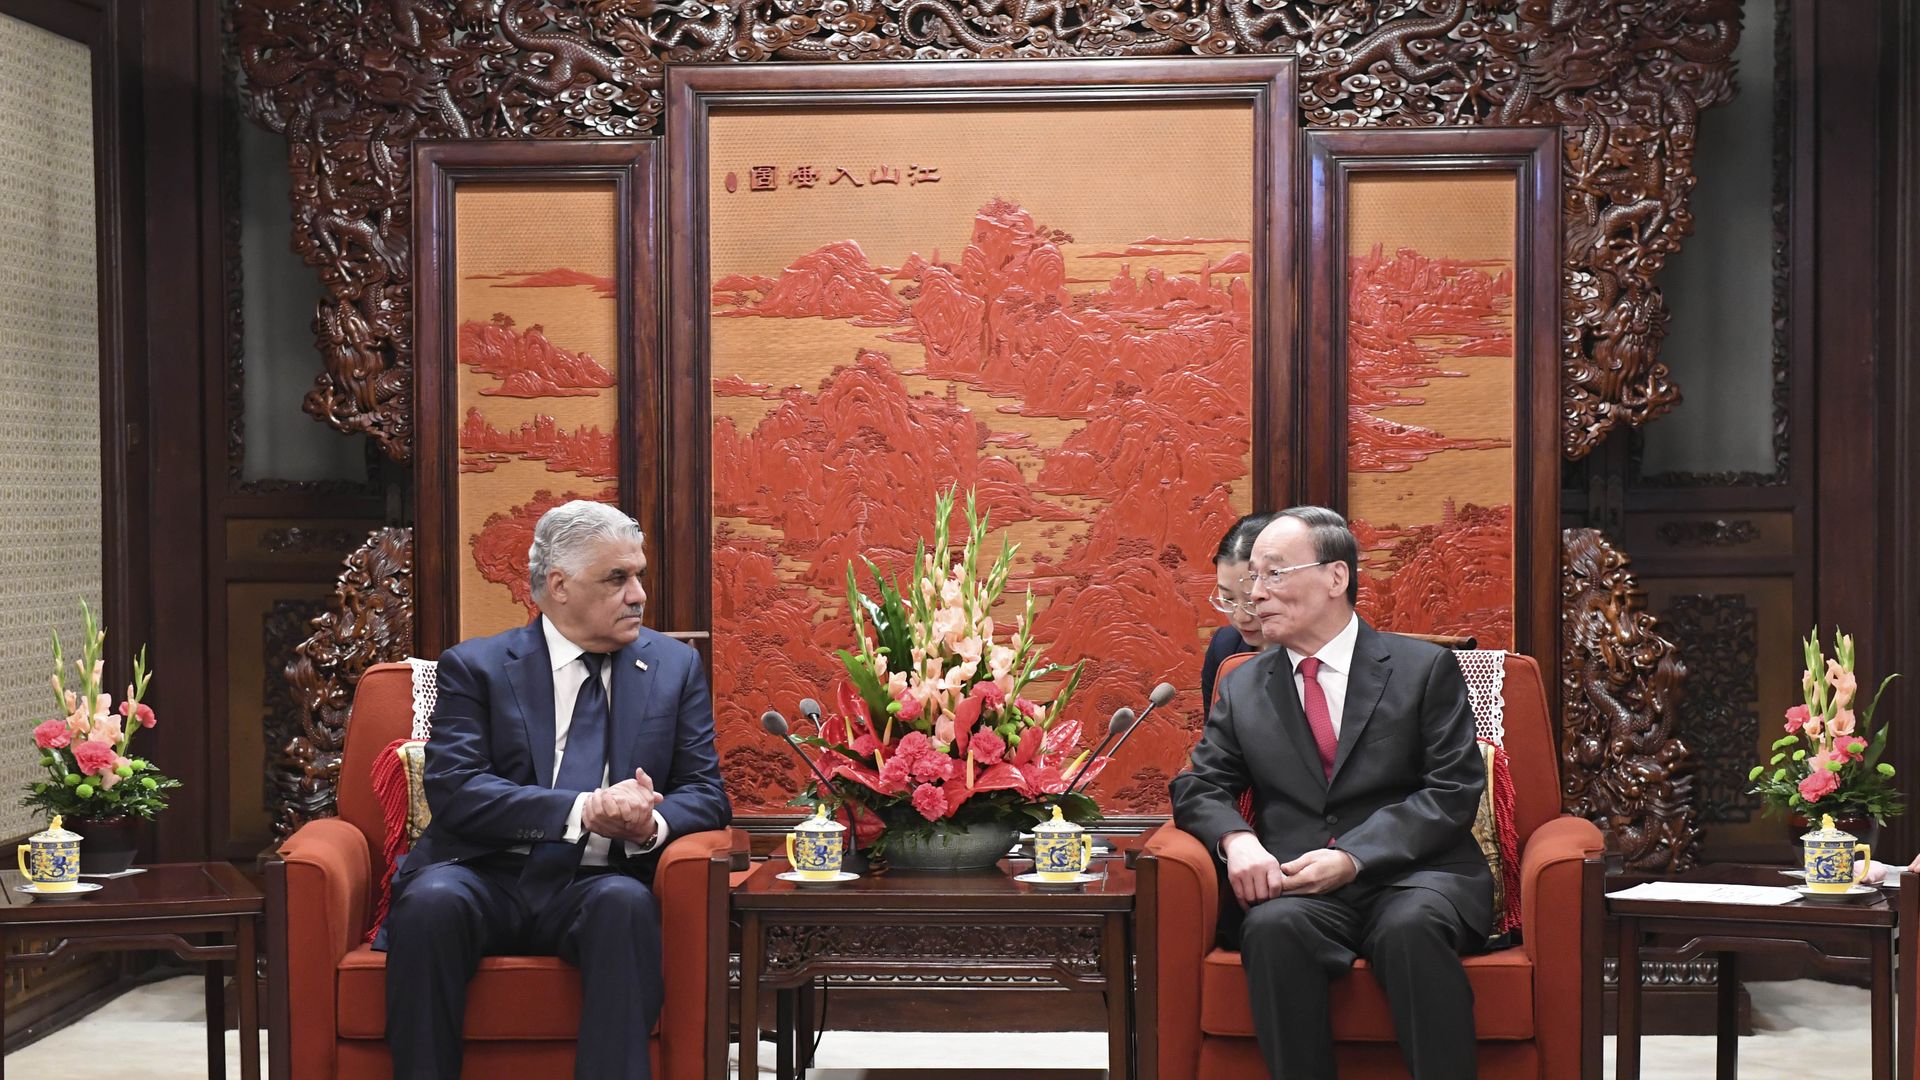 Dominican and Chinese leaders sit on armchairs in front of an orange and red painting